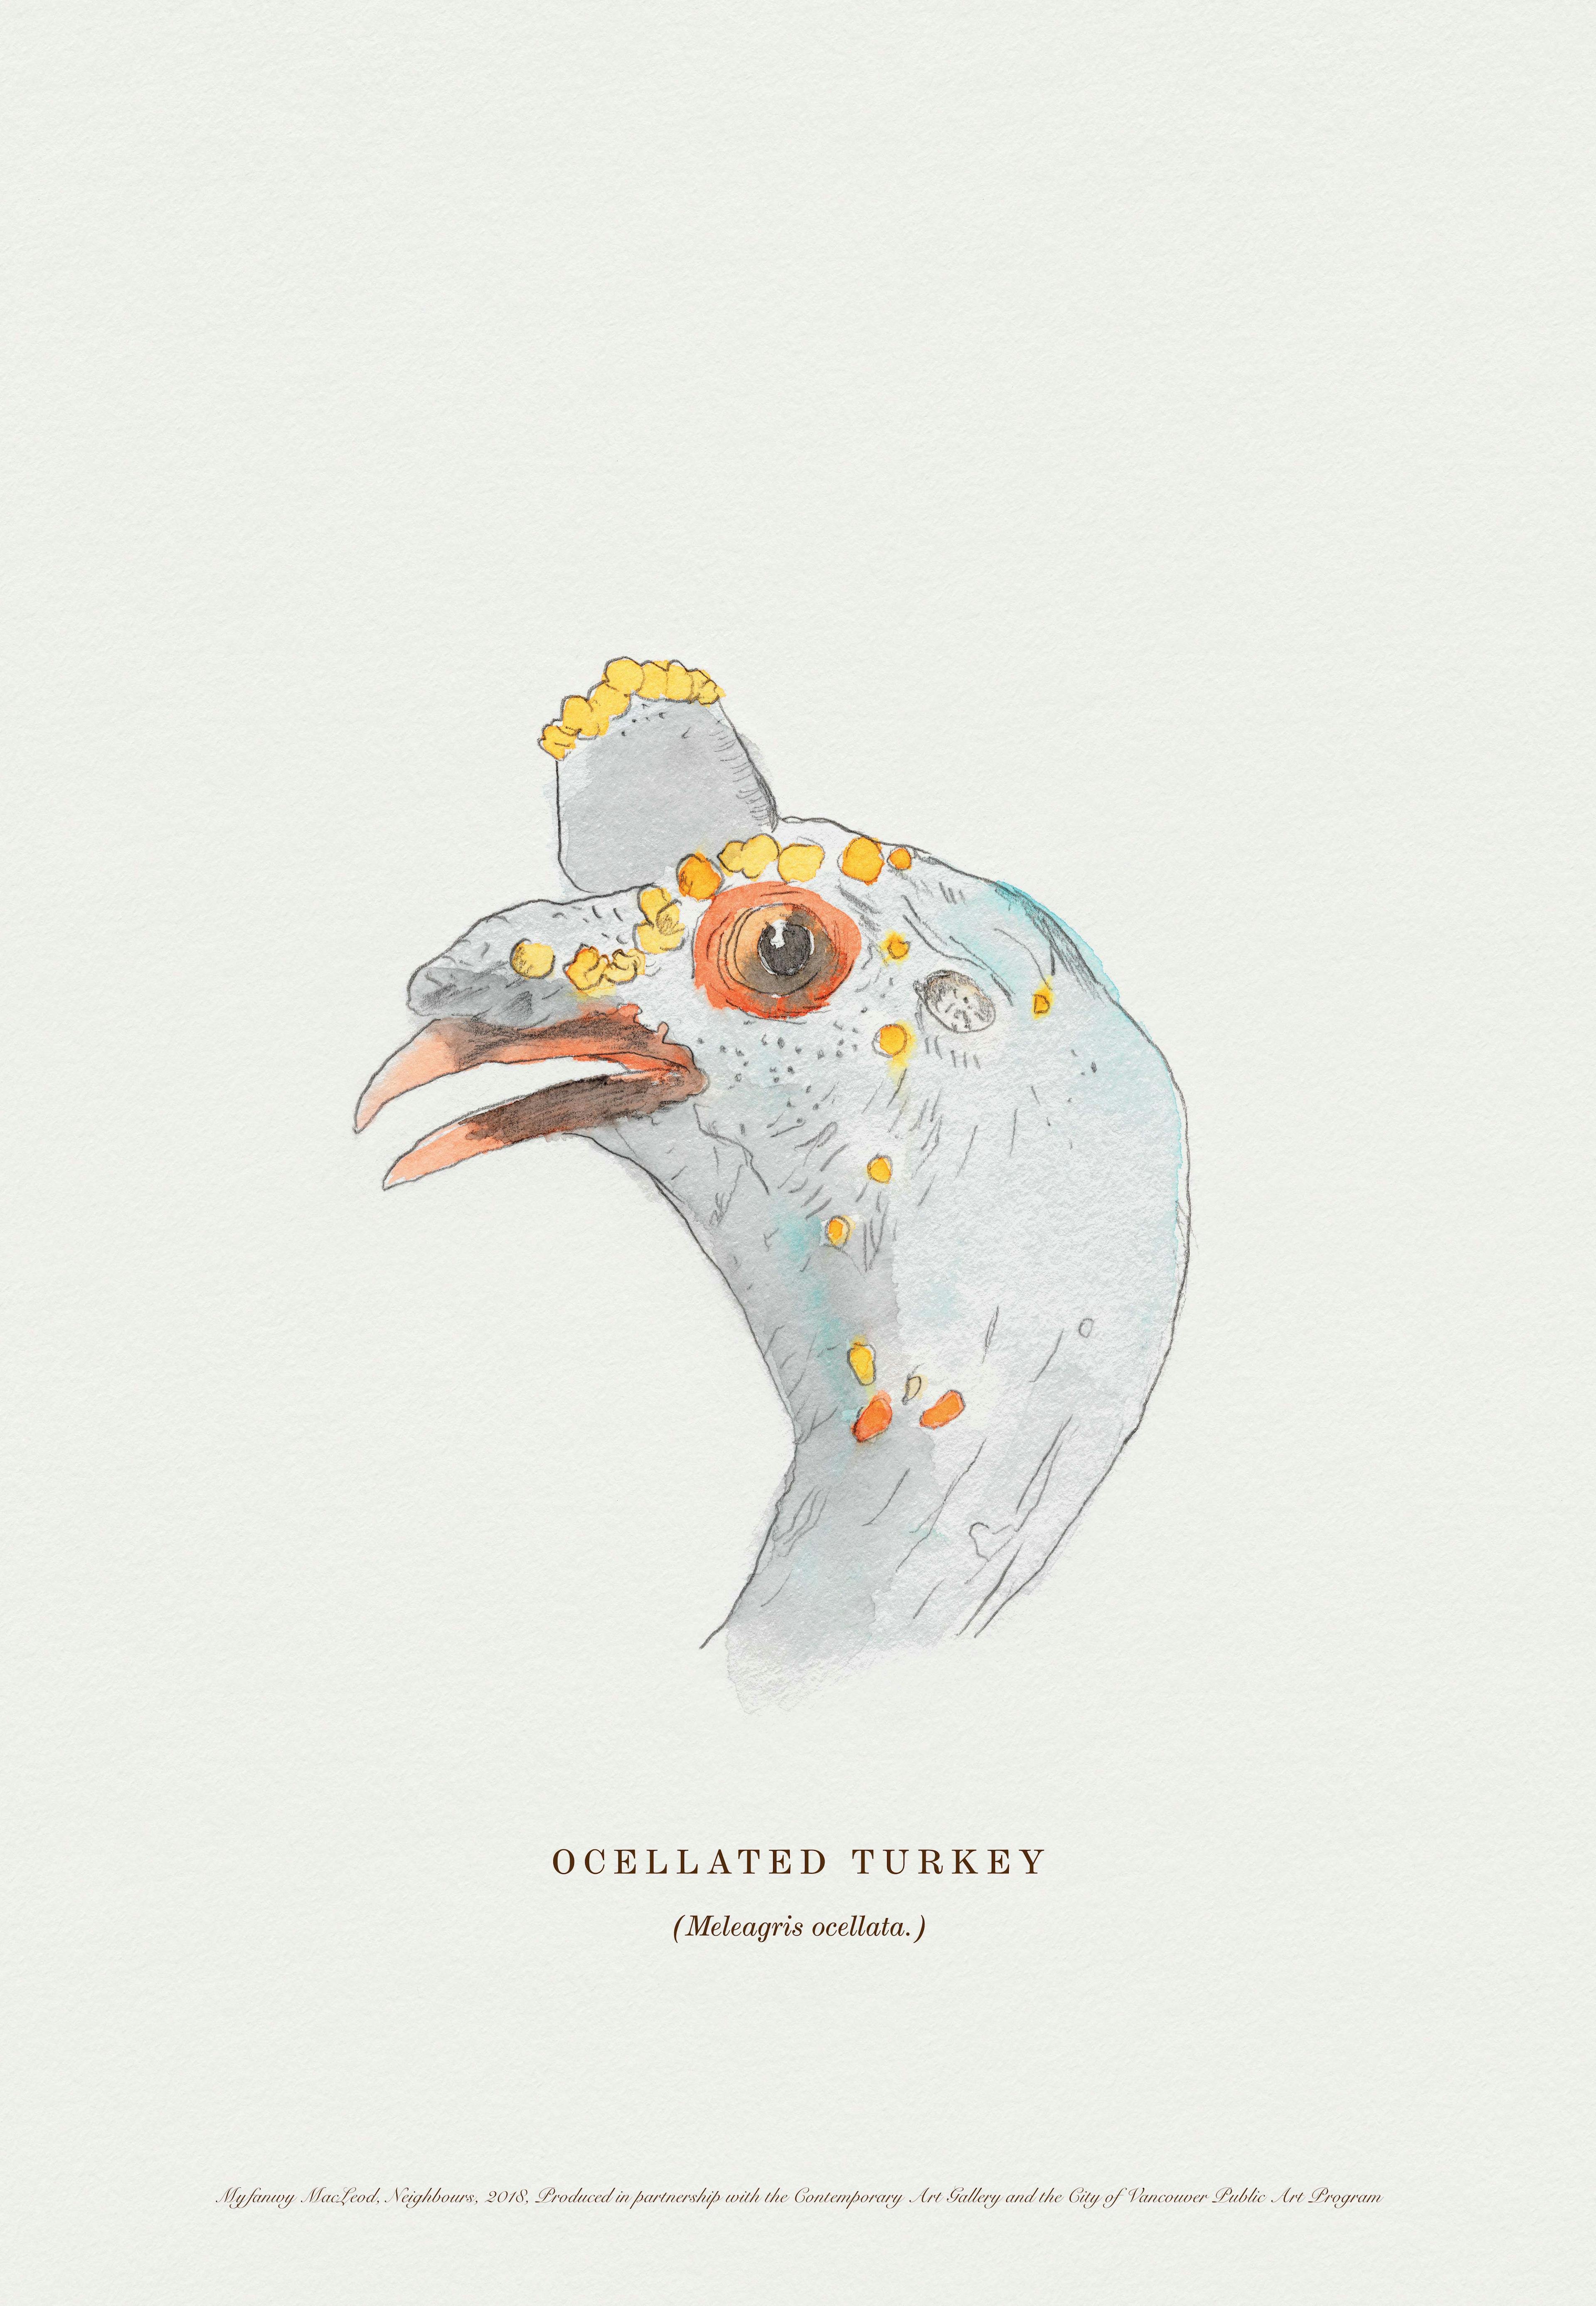 A watercolour print of the head of an ocellated turkey on a plain oof-white coloured paper. Below the image is text reading “OCELLATED TURKEY (Meleagris ocellata).”